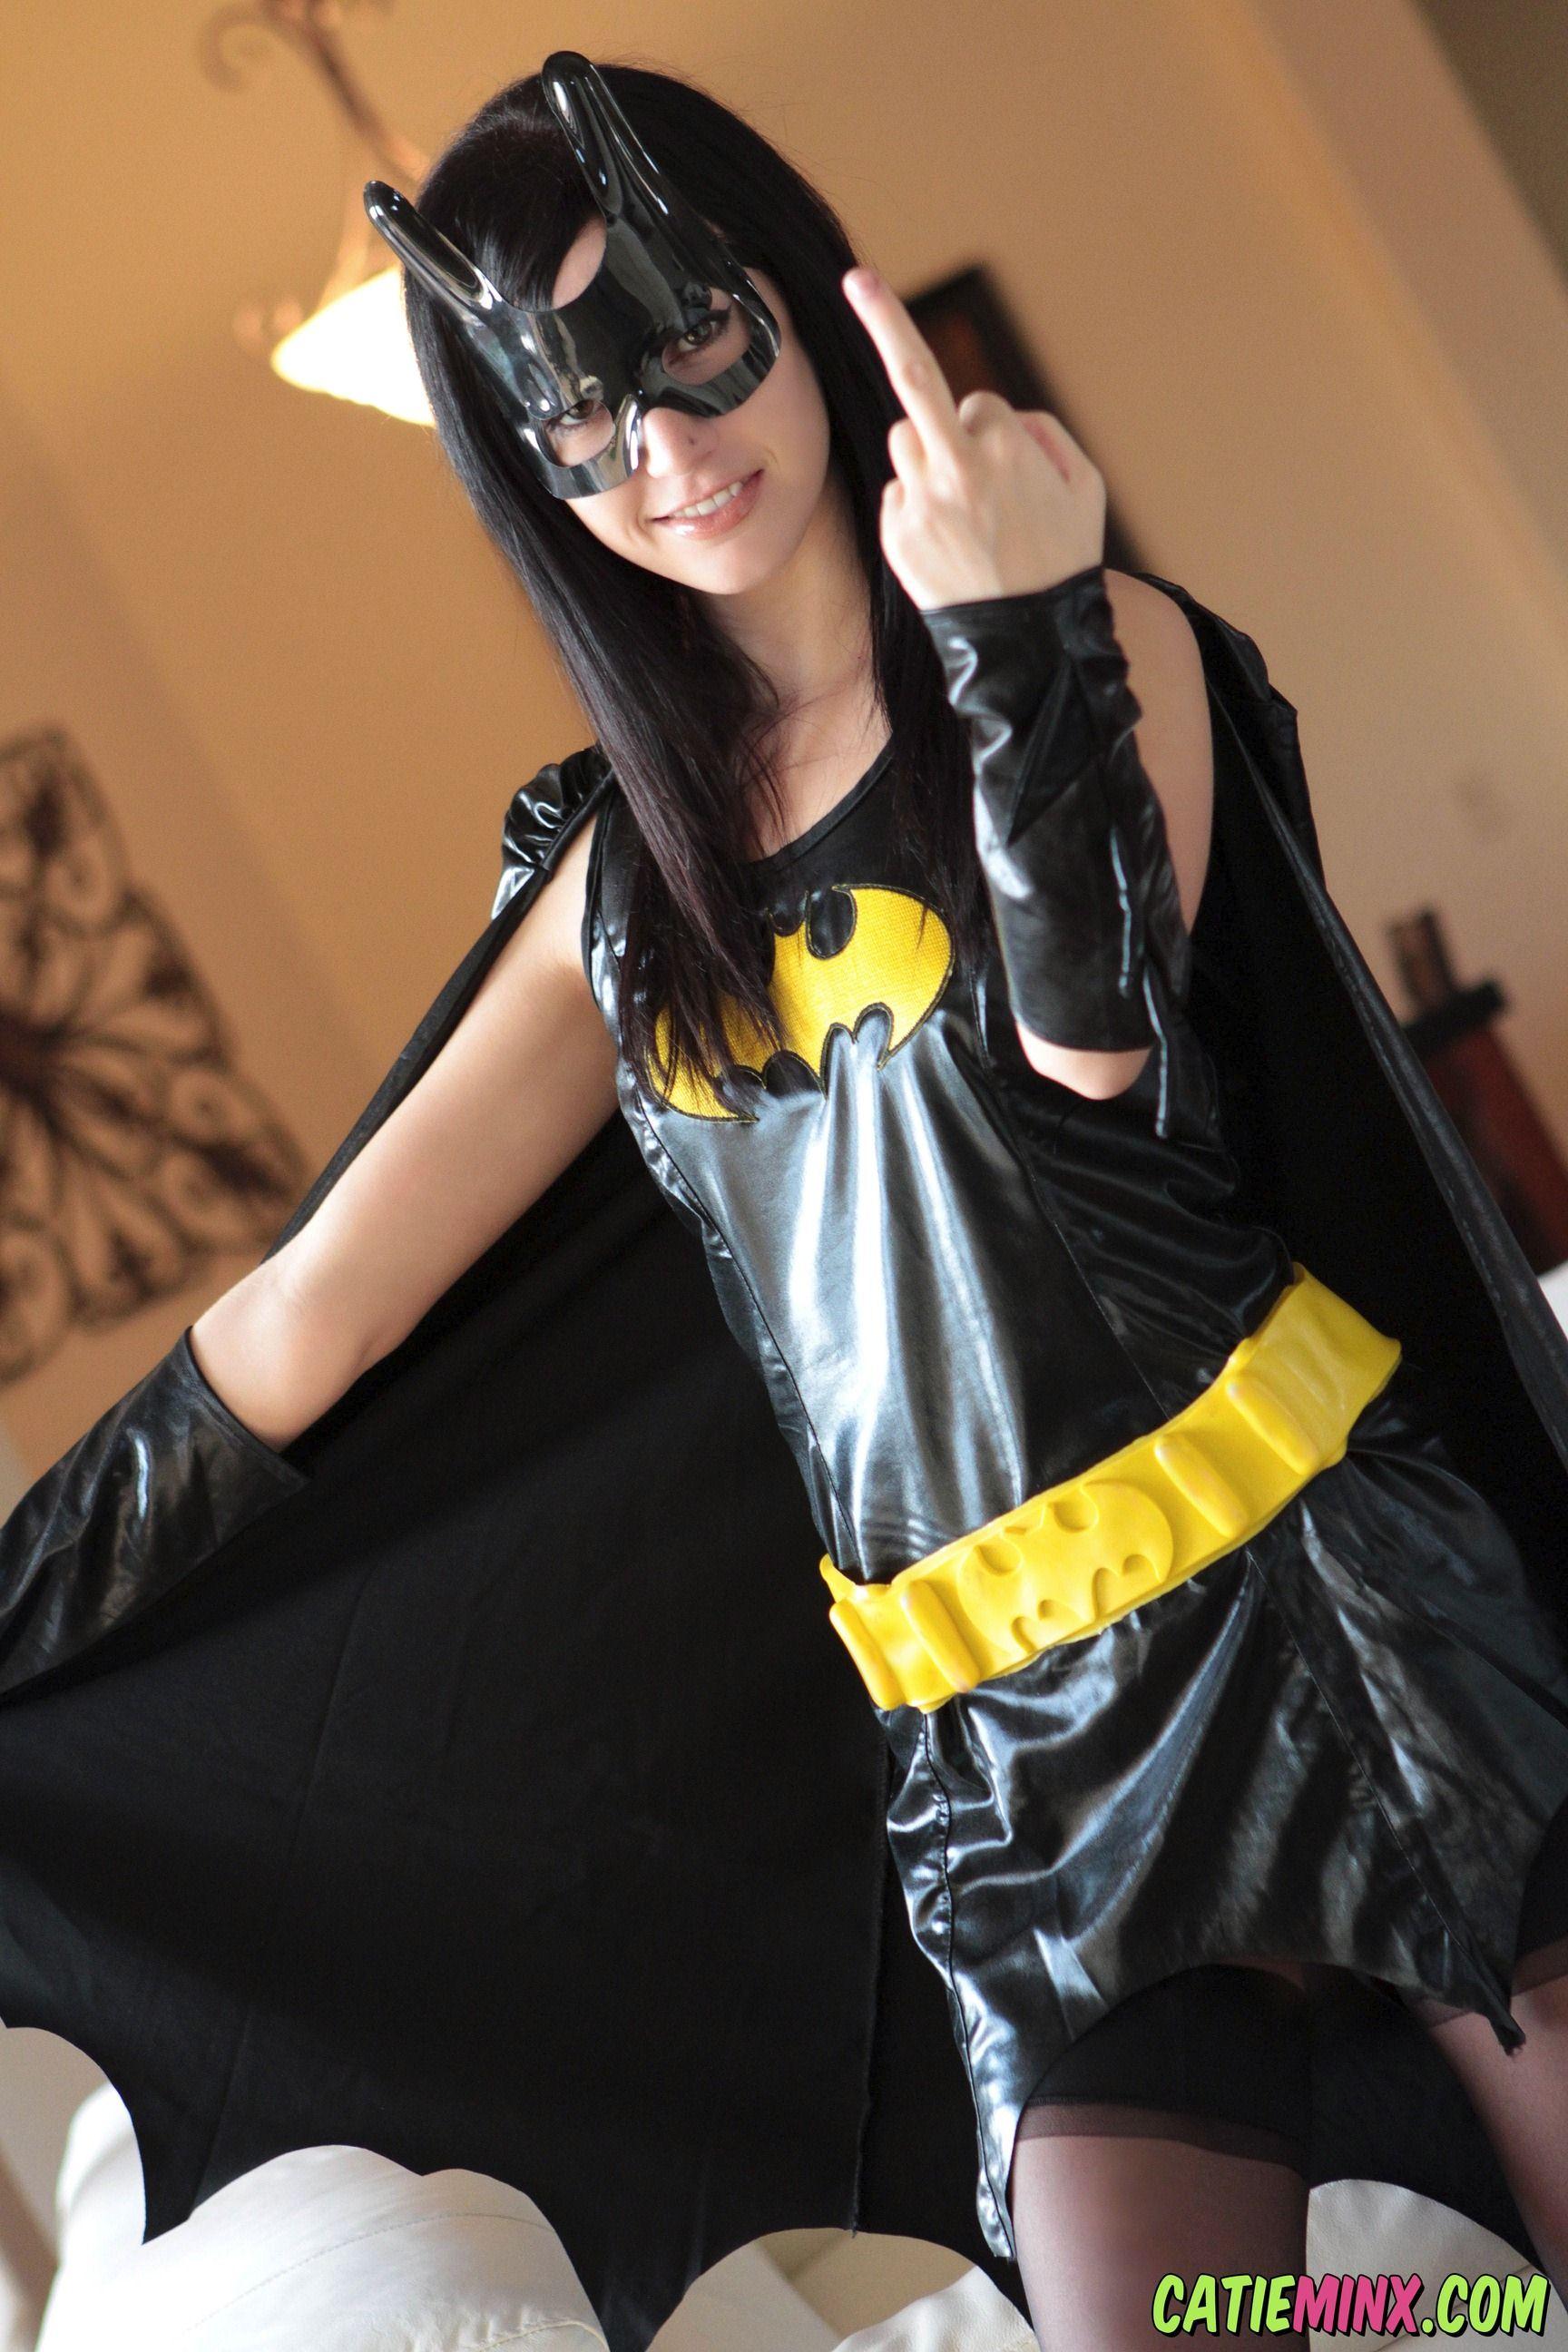 Pictures of Catie Minx celebrating the release of The Dark Knight Rises in style #53726969